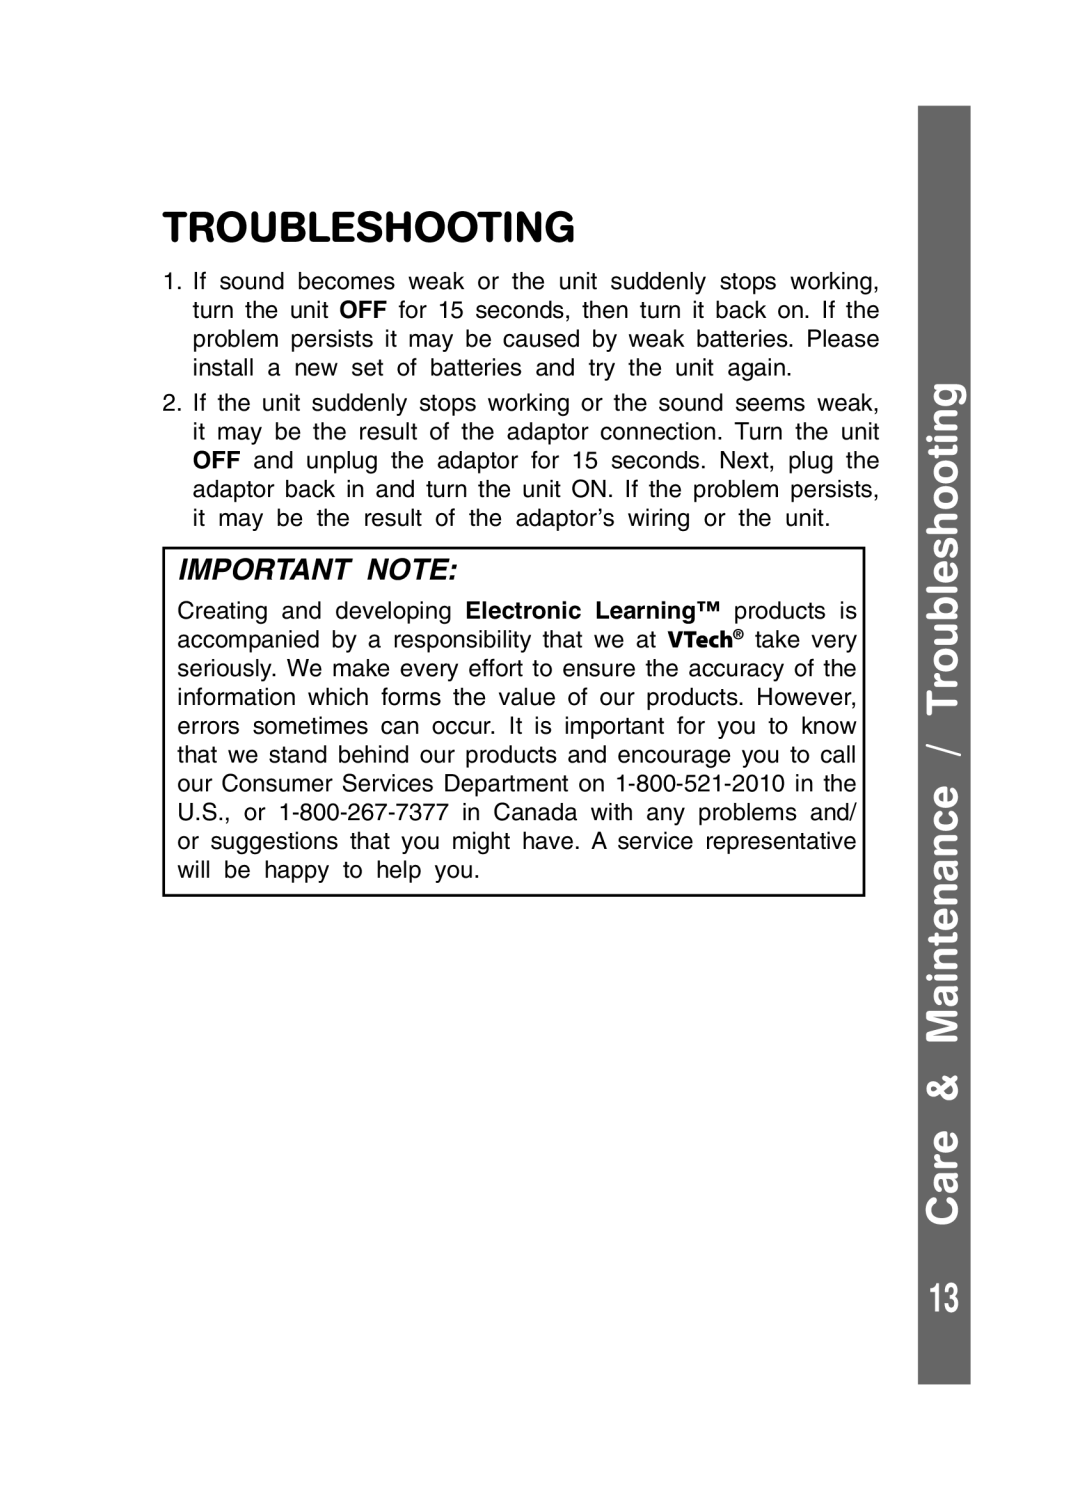 VTech 91-01256-043 user manual Care & Maintenance / Troubleshooting, Important Note 